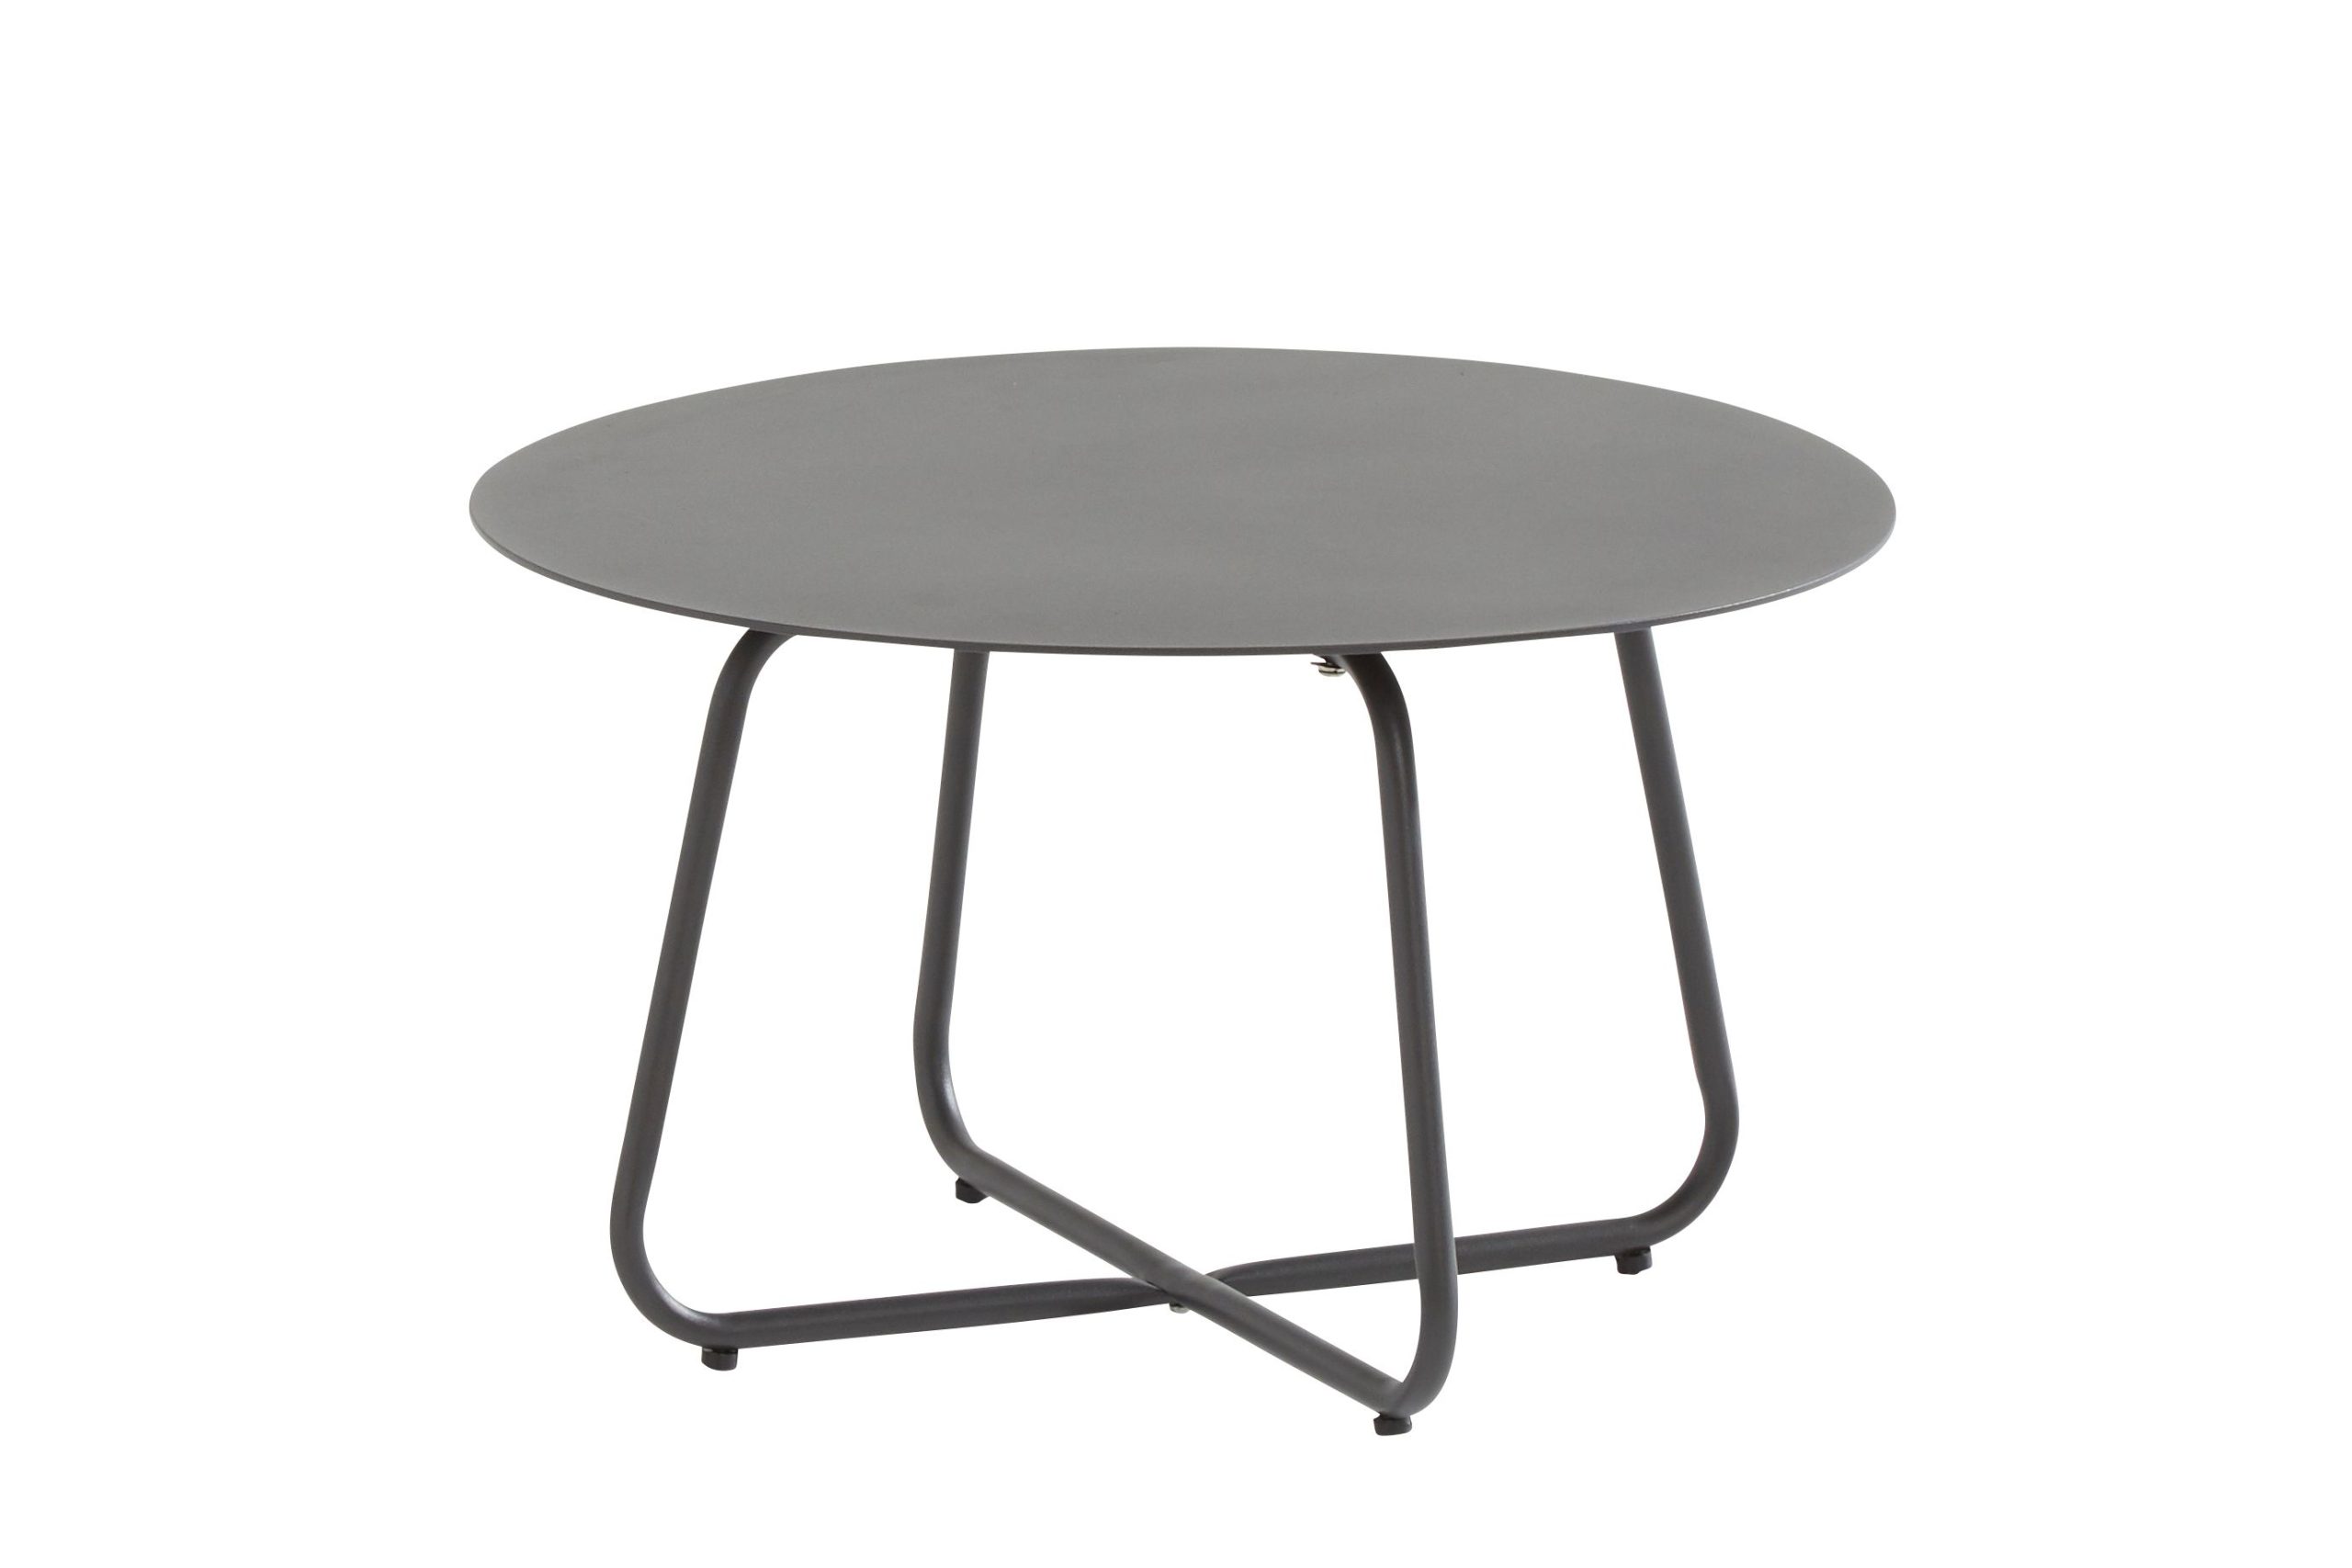 4 Seasons Outdoor Dali coffee table round 58 | Shackletons